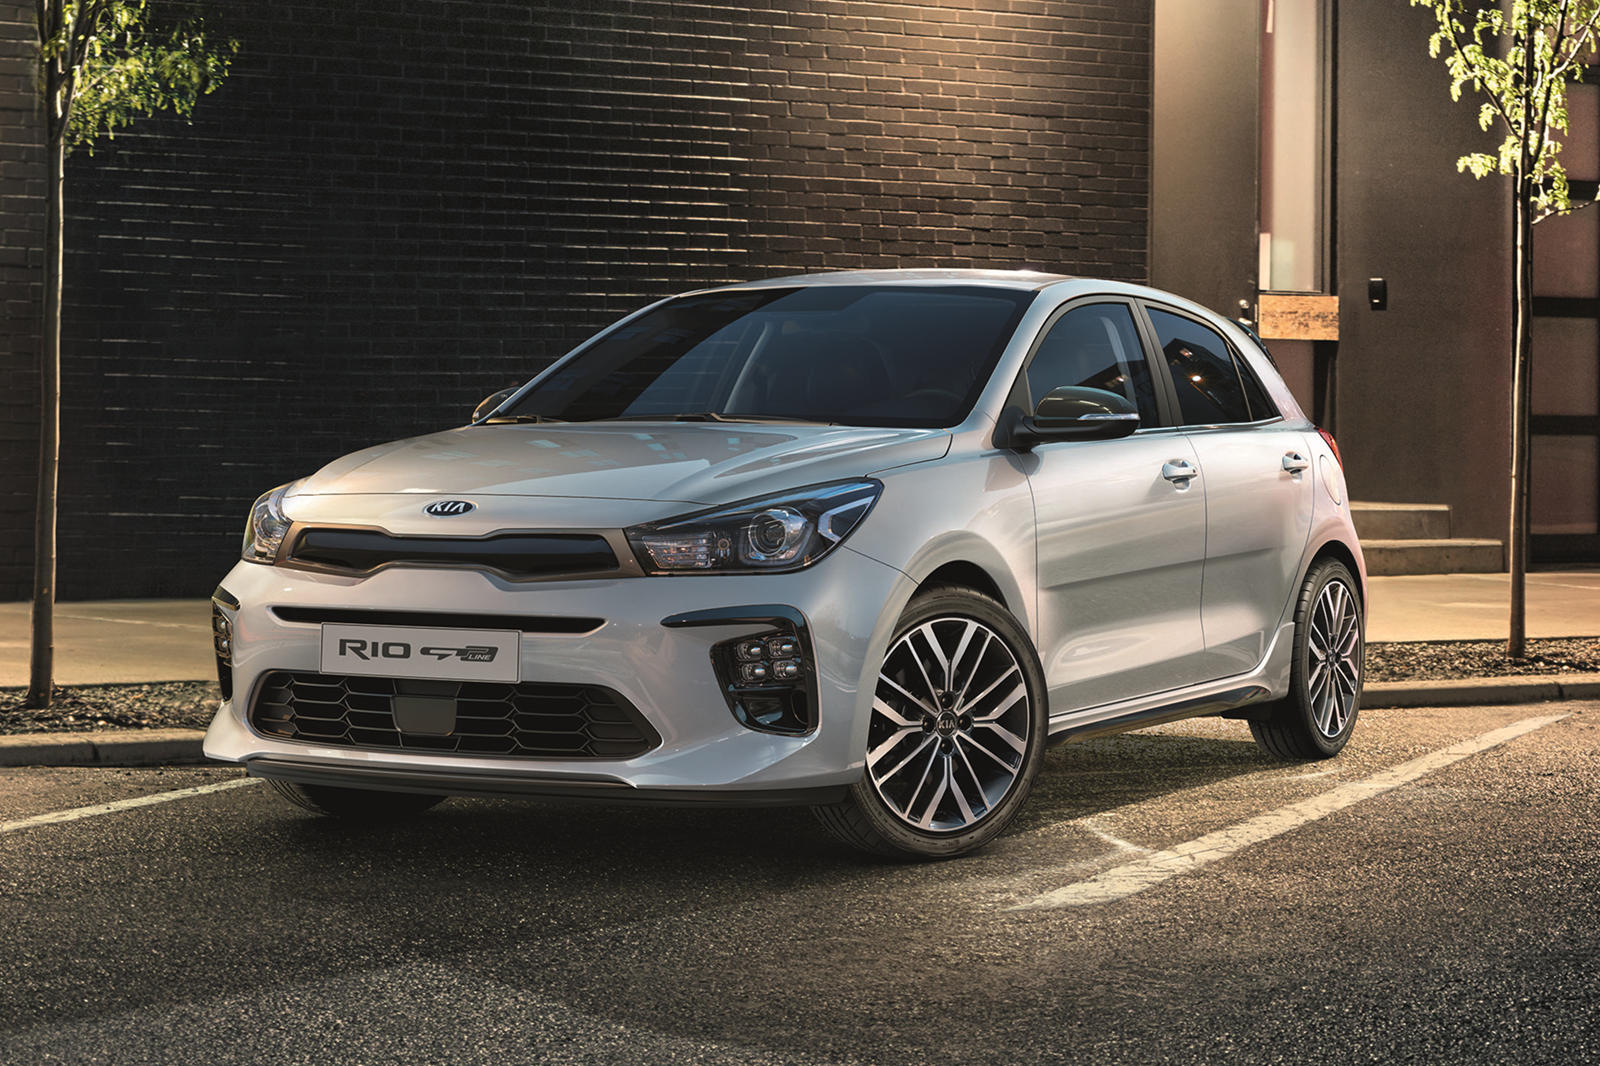 2021 Kia Rio Revealed With Fresh Styling And New Hybrid ...